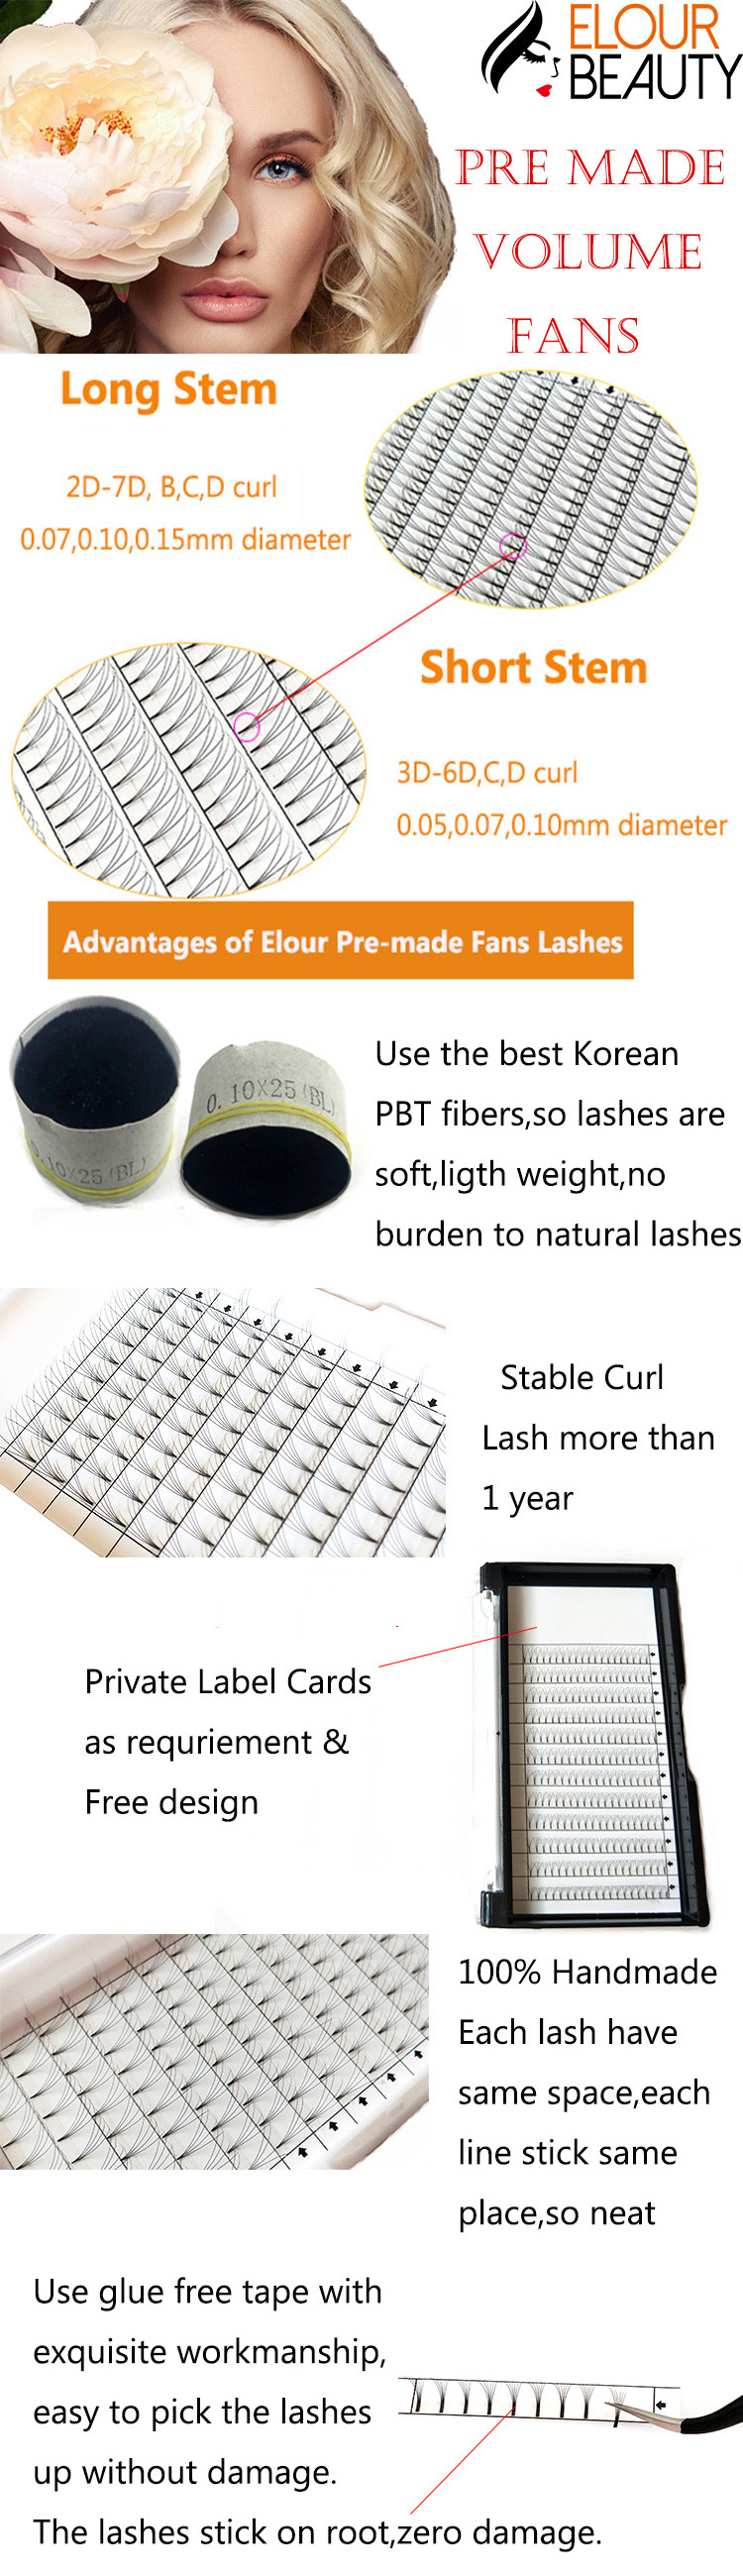 the-advantages-of the premade-fand-eyelash-extensions-factory.jpg